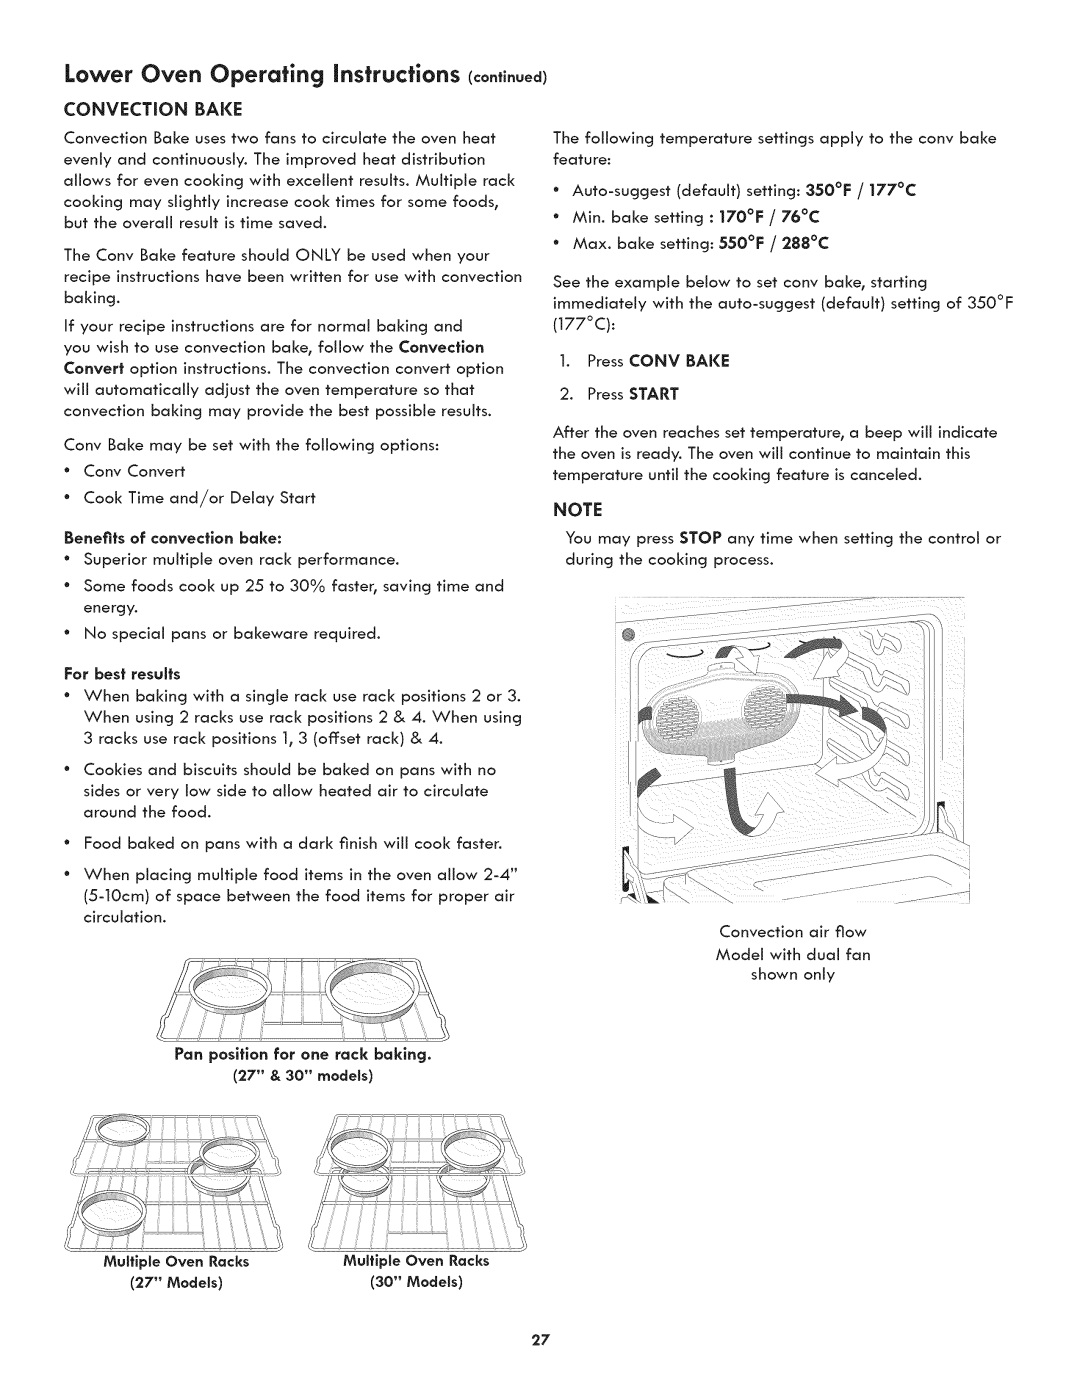 Kenmore 790.488, 790.489 Lower Oven Operating instructions continued, Convection Bake, Pan position for one rack baking 